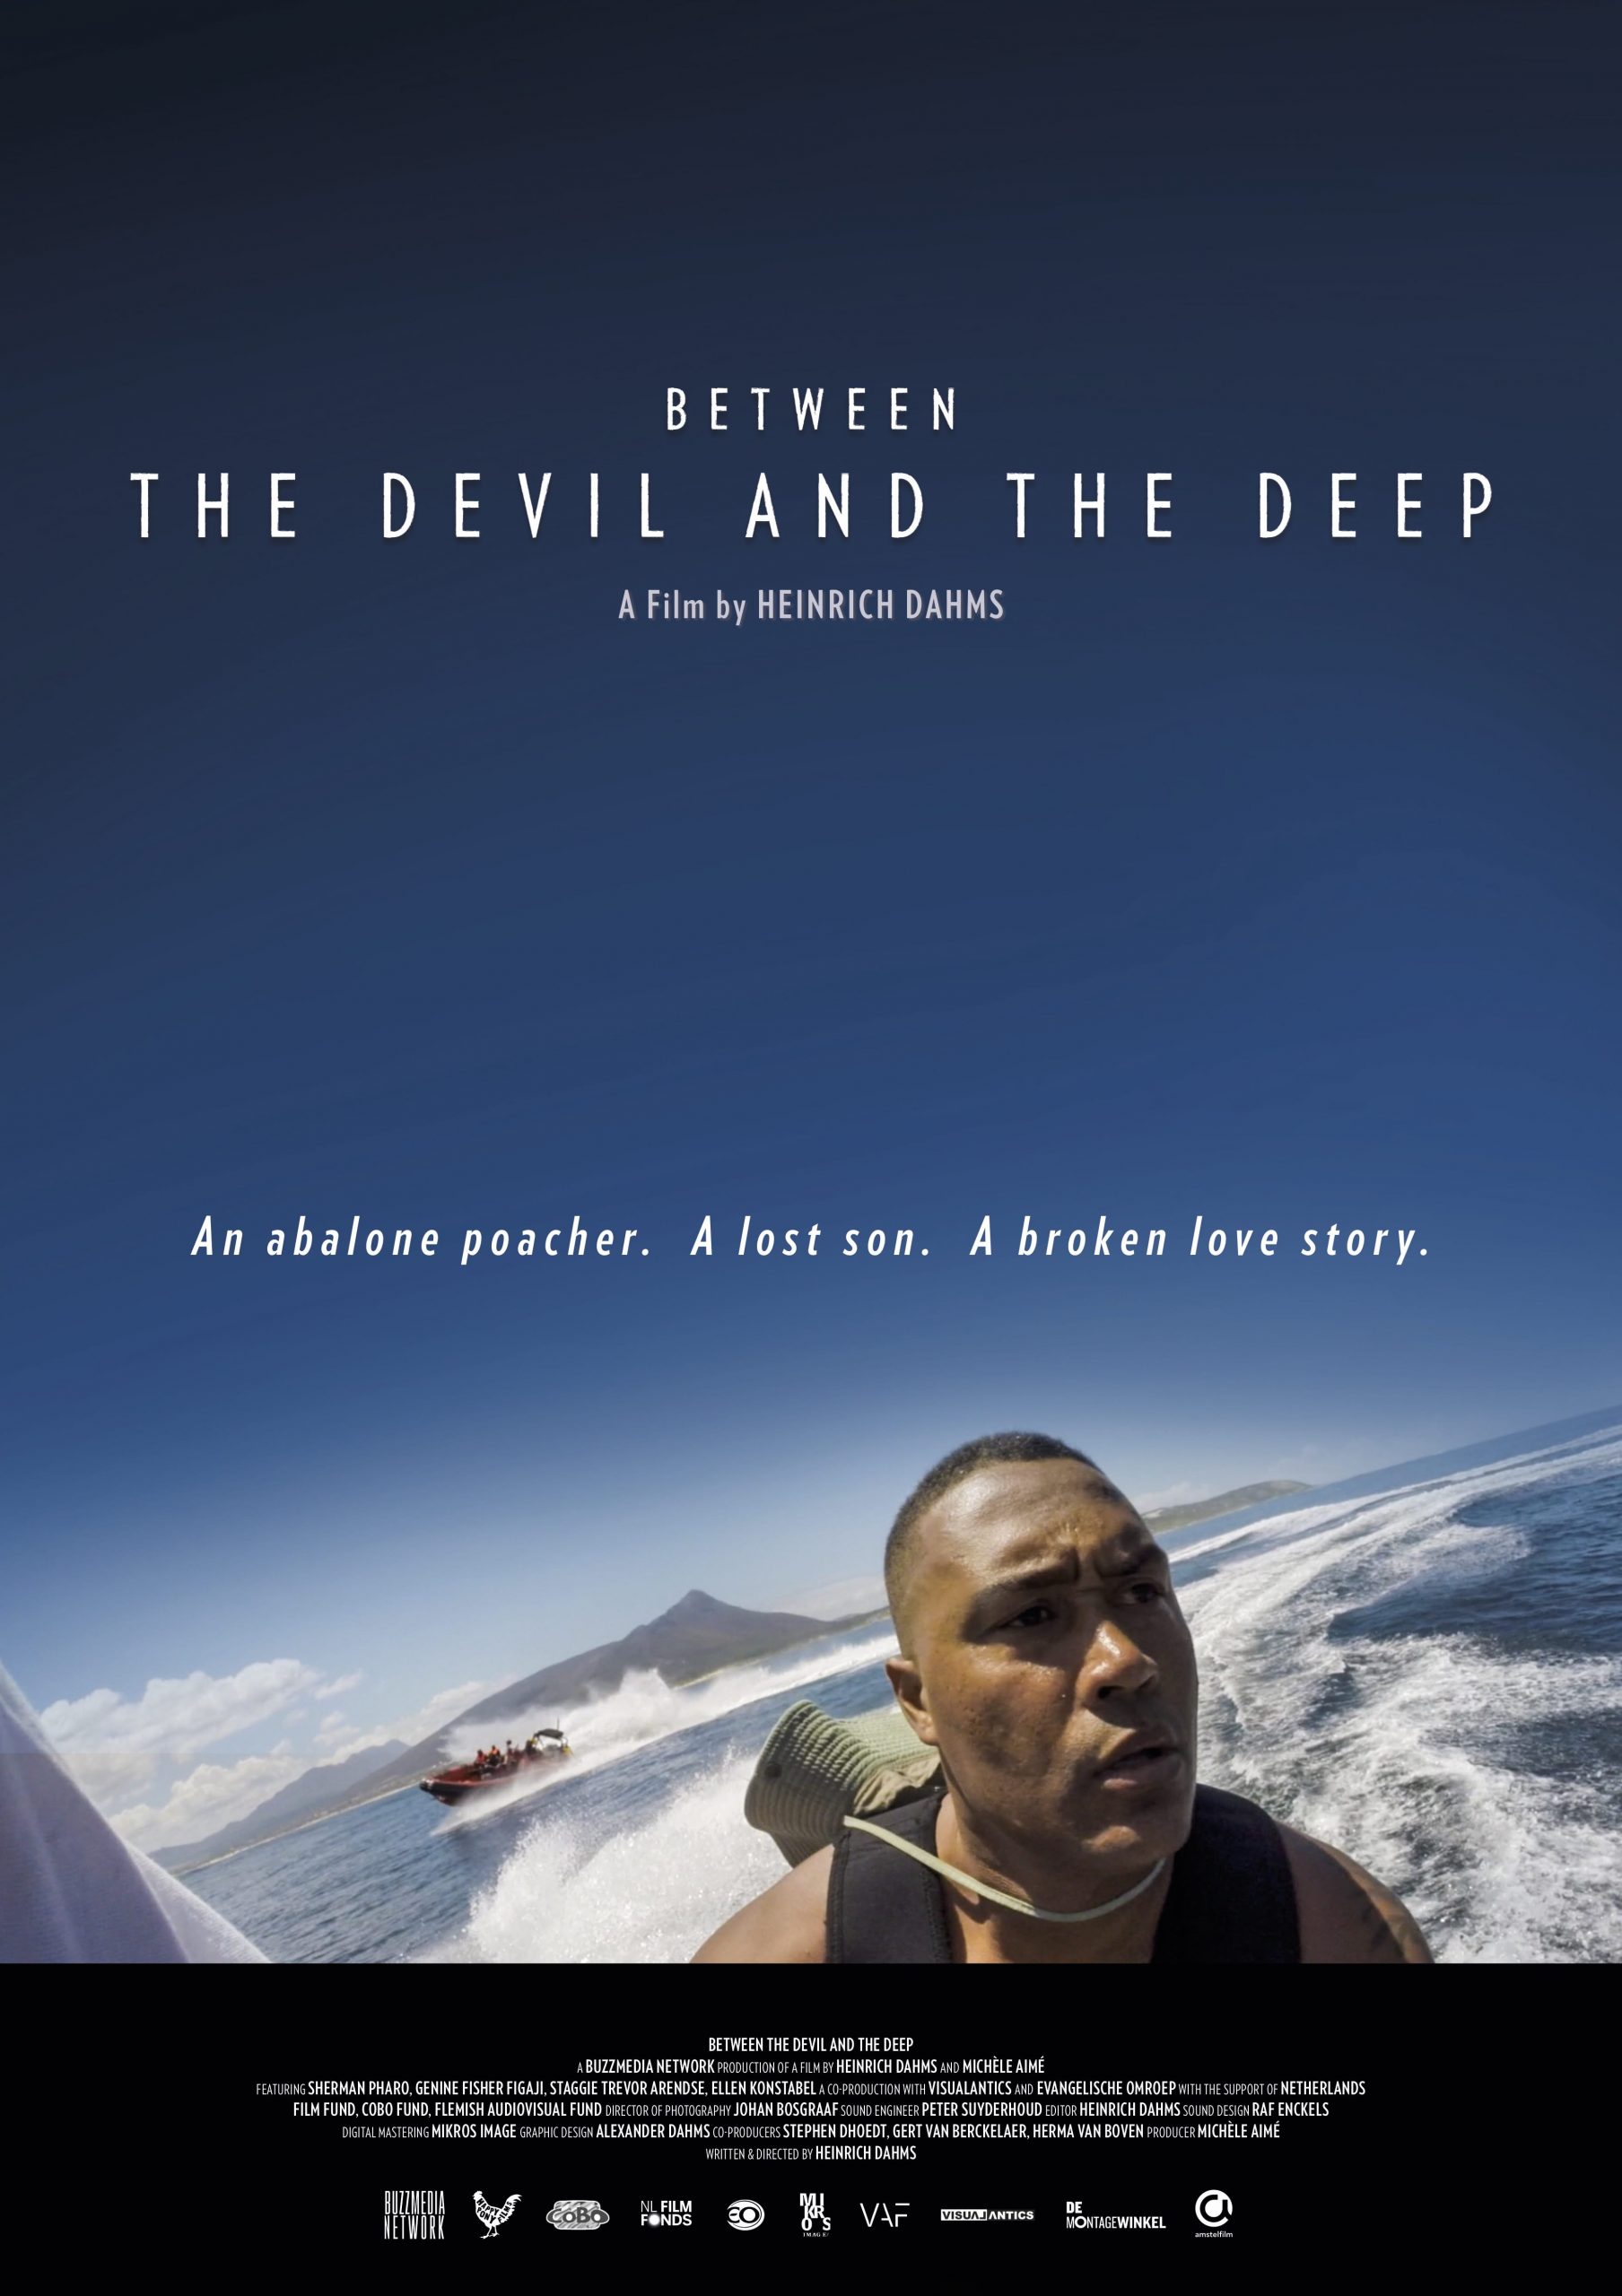 Between the Devil and The Deep